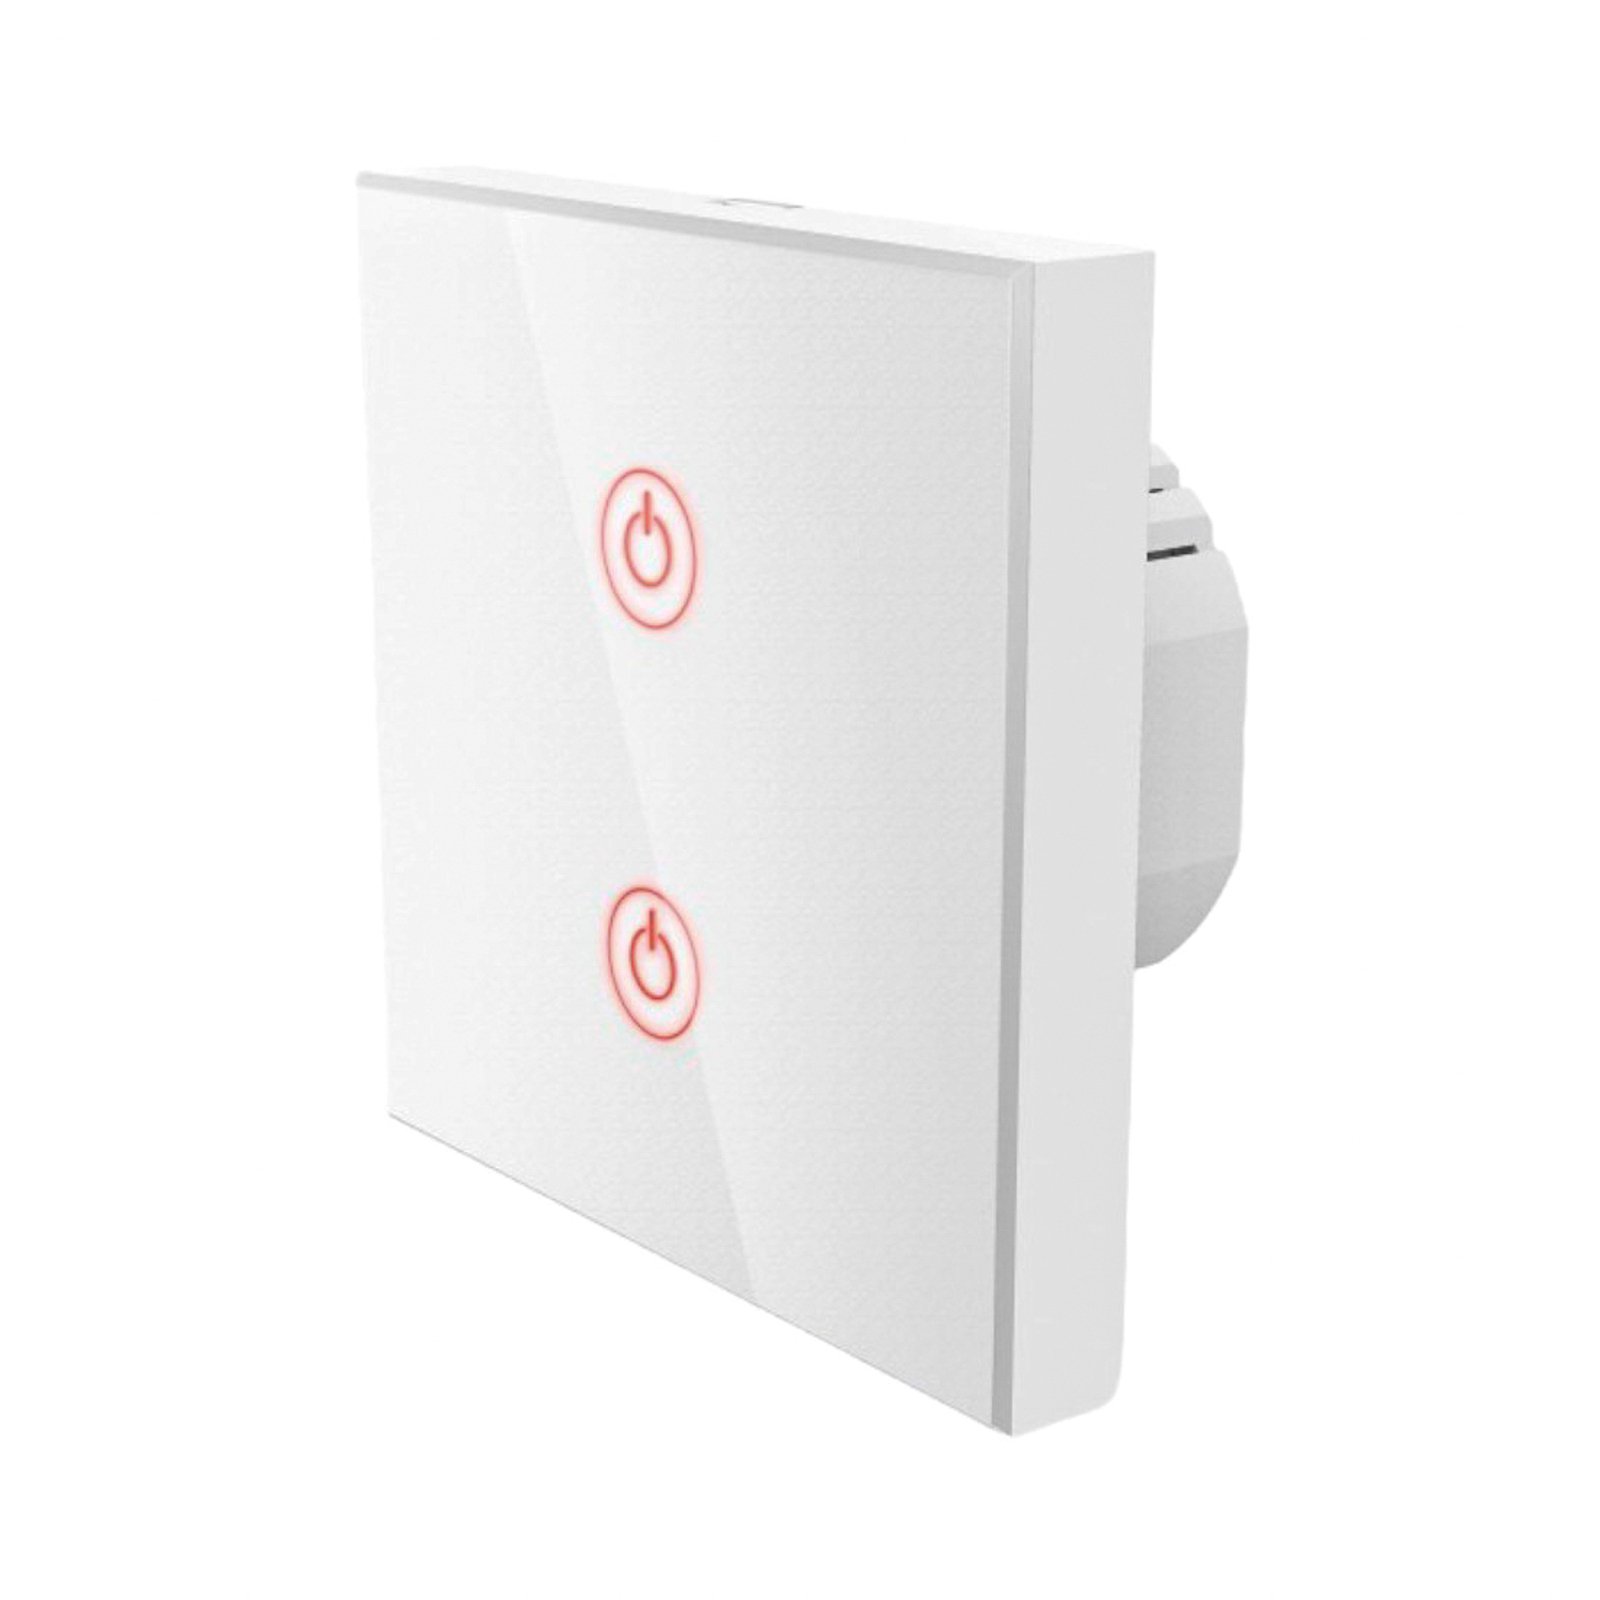 Hama WiFi touch wall switch, flush-mounted, double